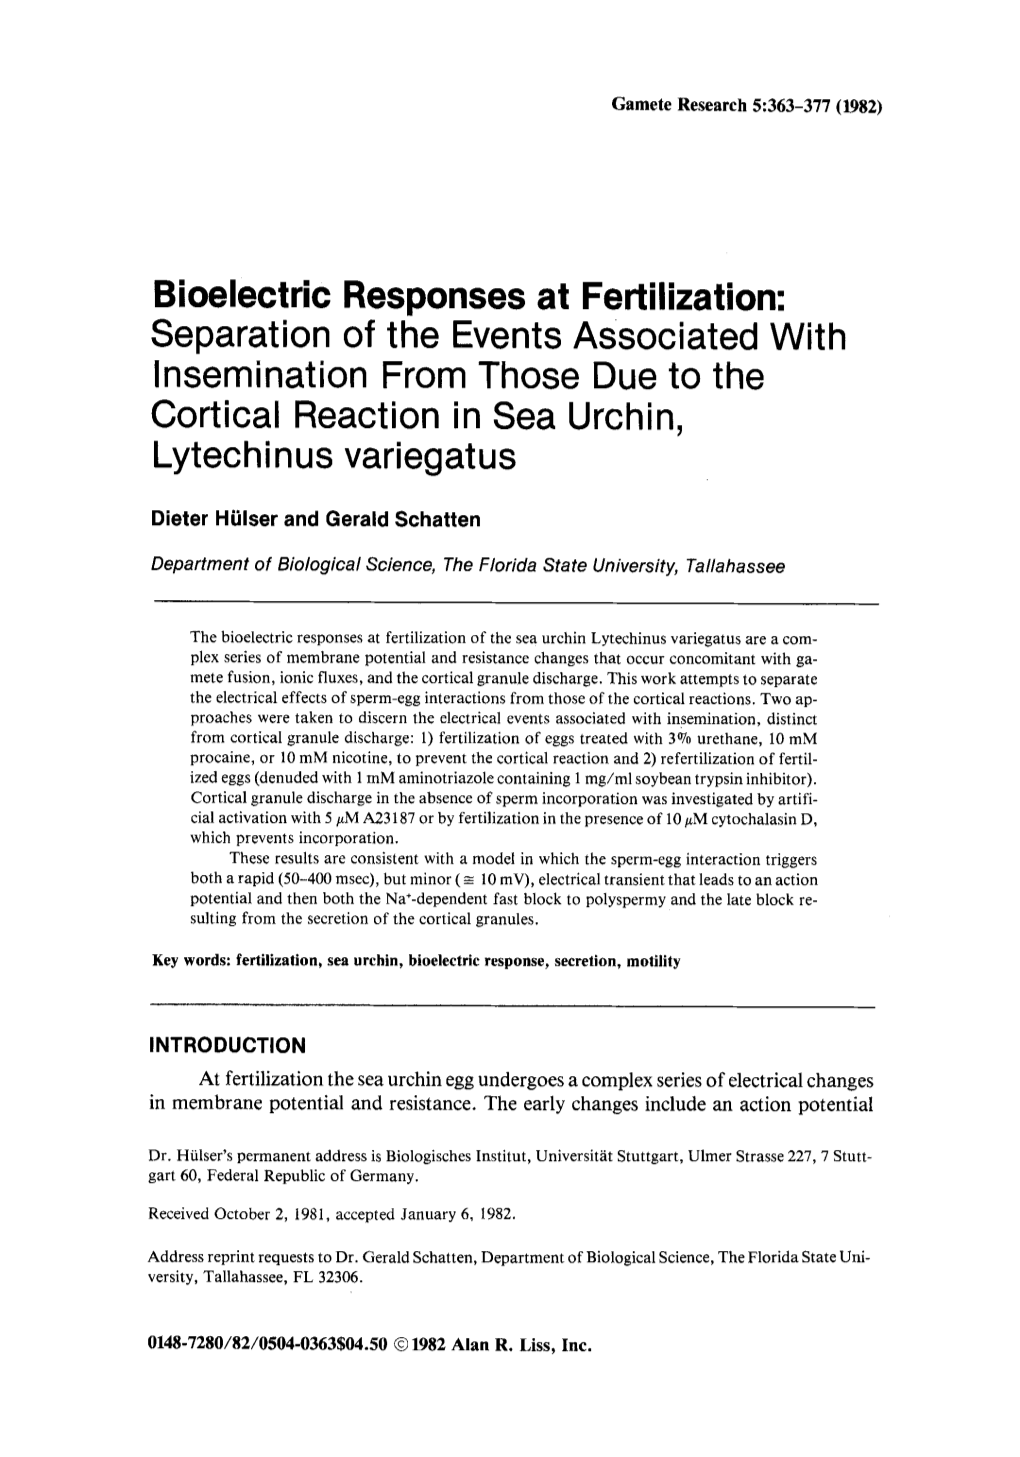 Bioelectric Responses at Fertilization: Separation of the Events Associated